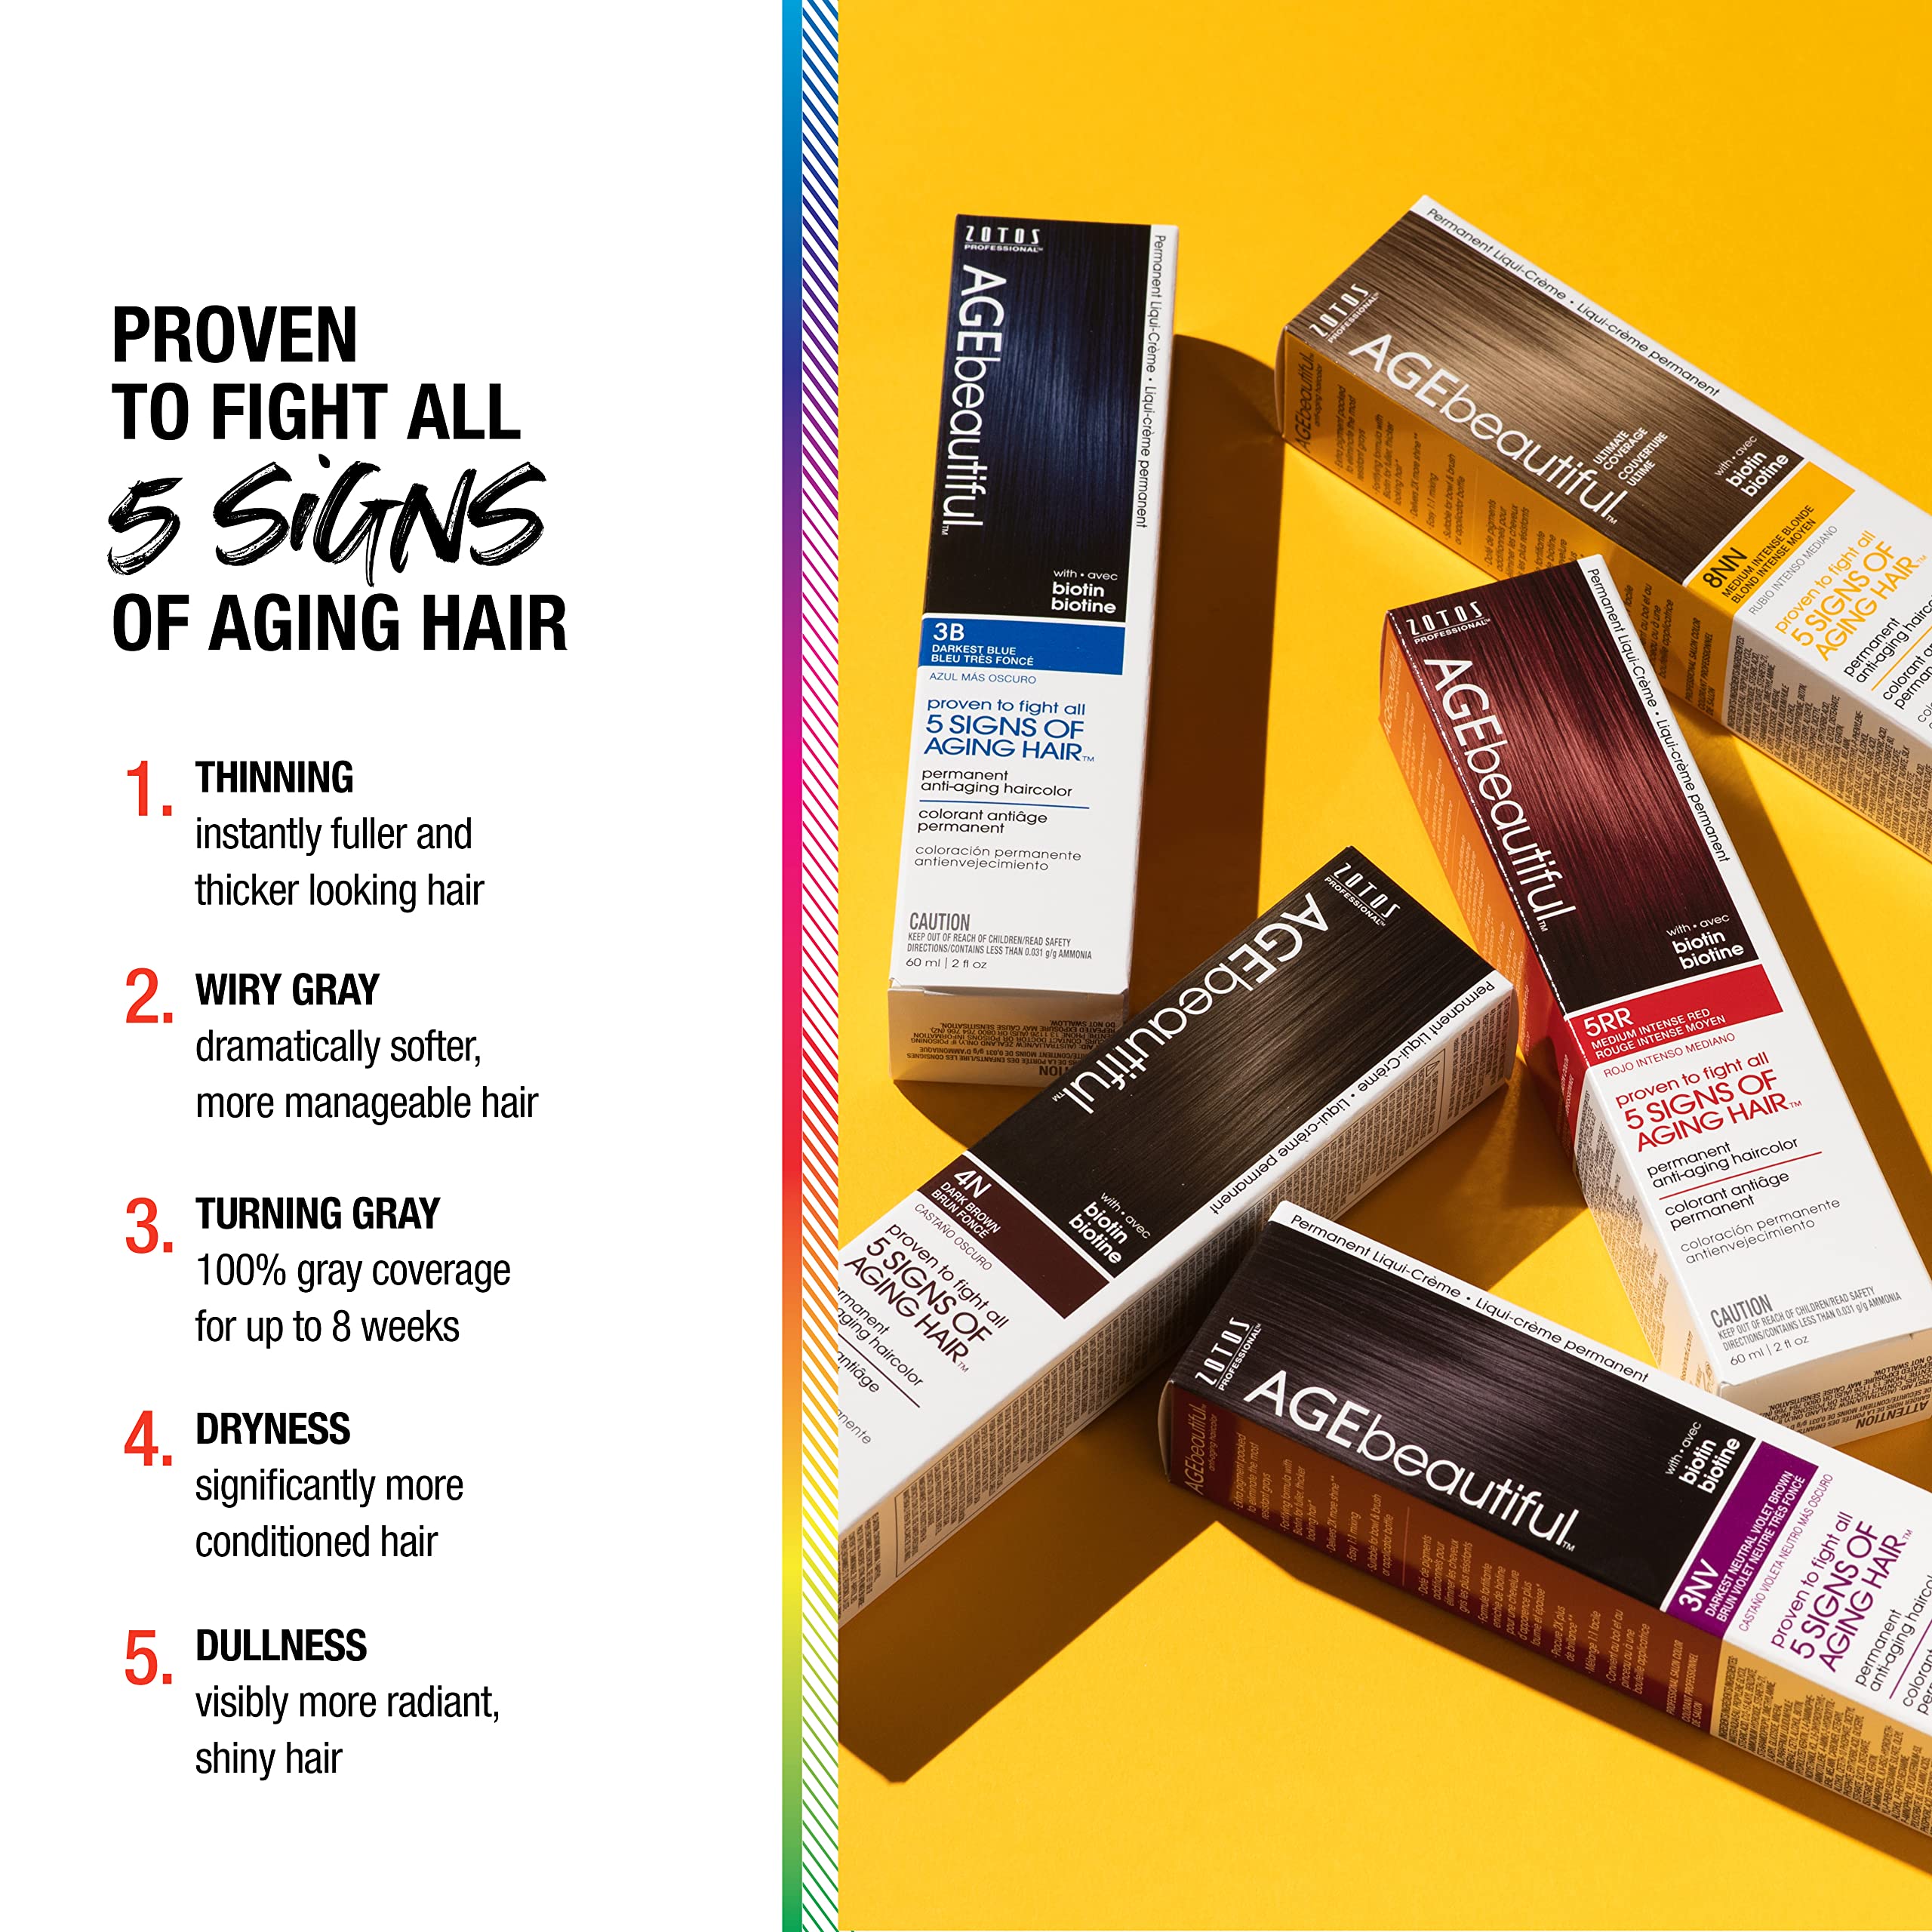 AGEbeautiful Permanent Liqui Creme Hair Color Dye Starter Kit | Developer | Applicator Bottle | Shampoo | Conditioner | Gloves | Salon Coloring Tools | Everything You Need